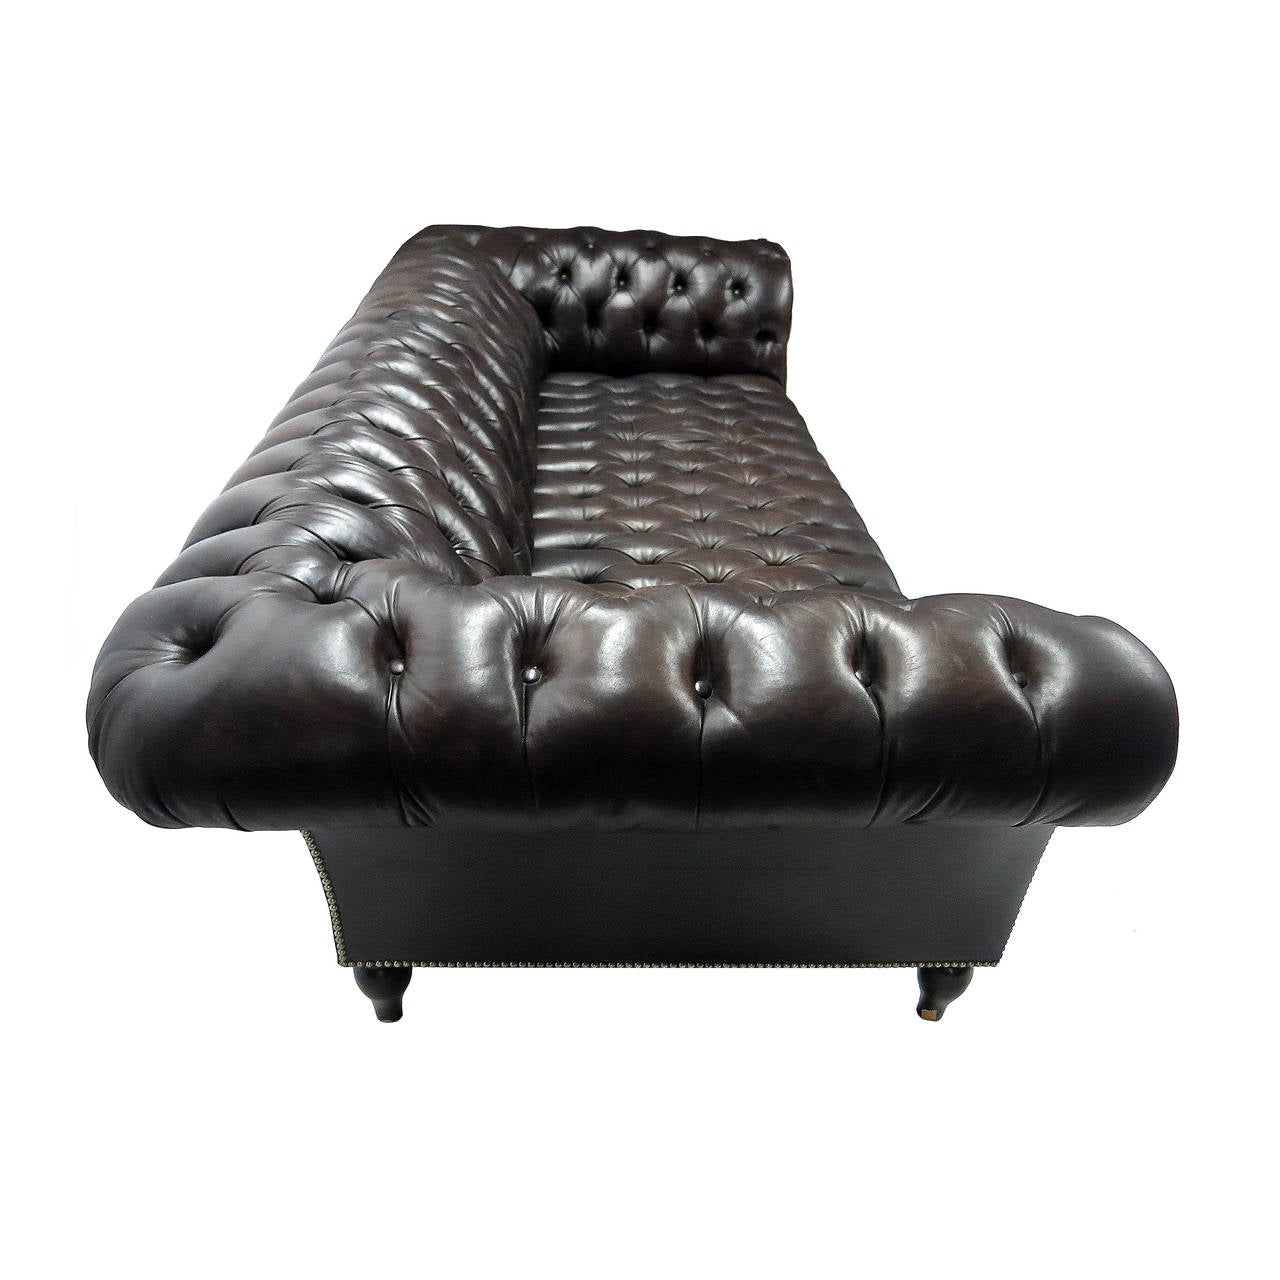 American Chesterfield Sofa in Chocolate Brown Tufted Leather, circa 1980, USA